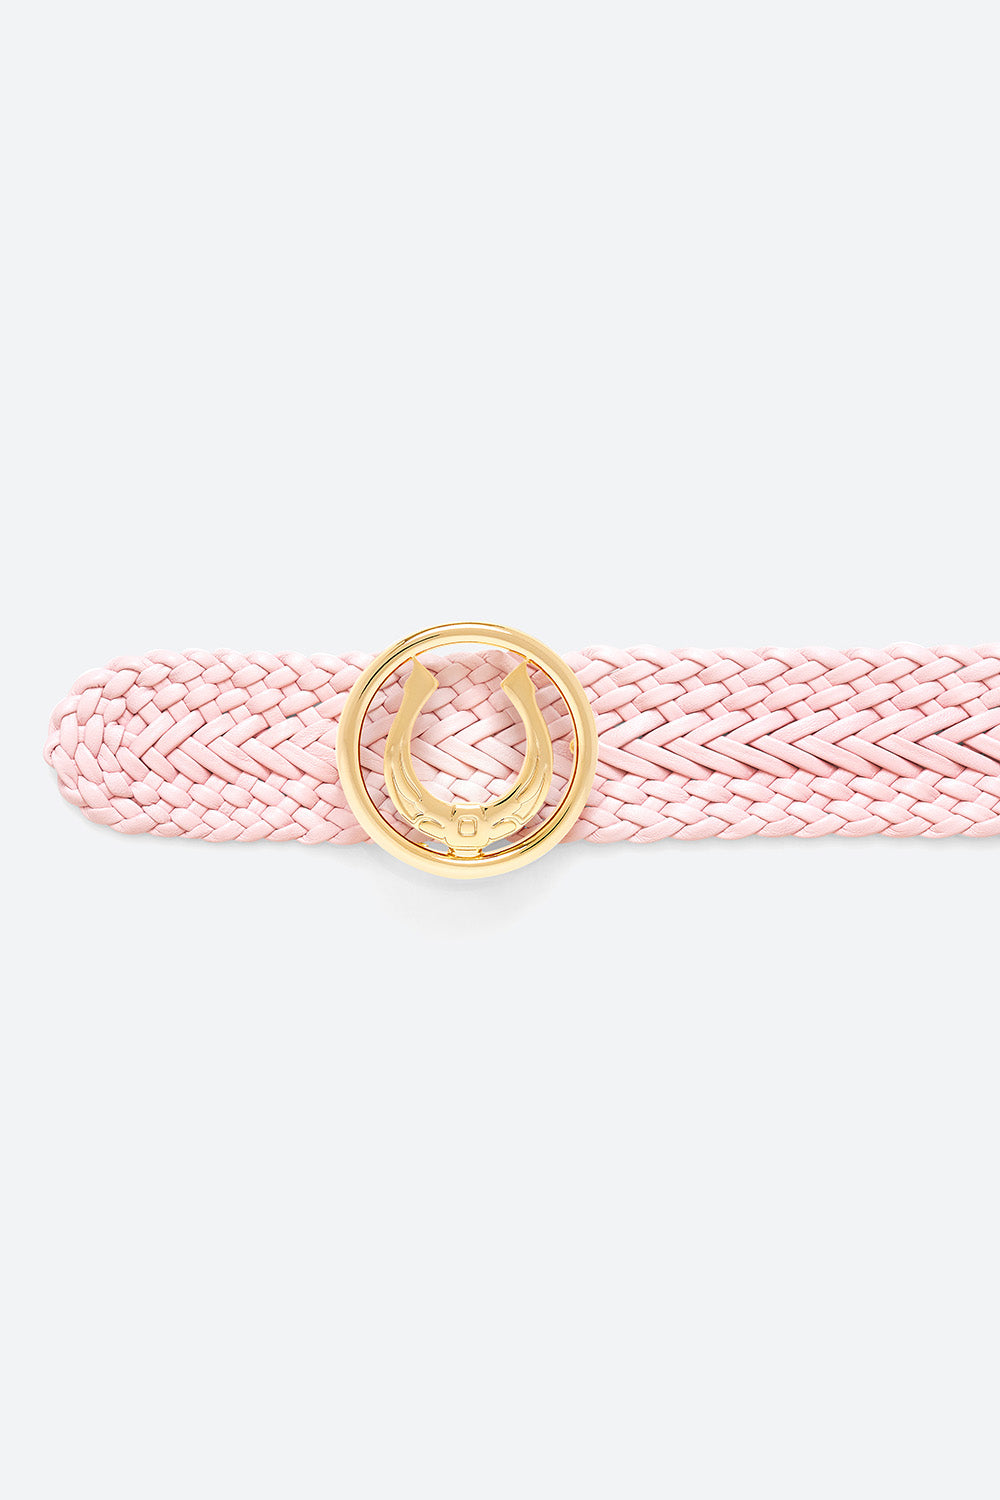 Women's Lucky Belt in Peony Pink, Polished Gold-toned Horseshoe Buckle